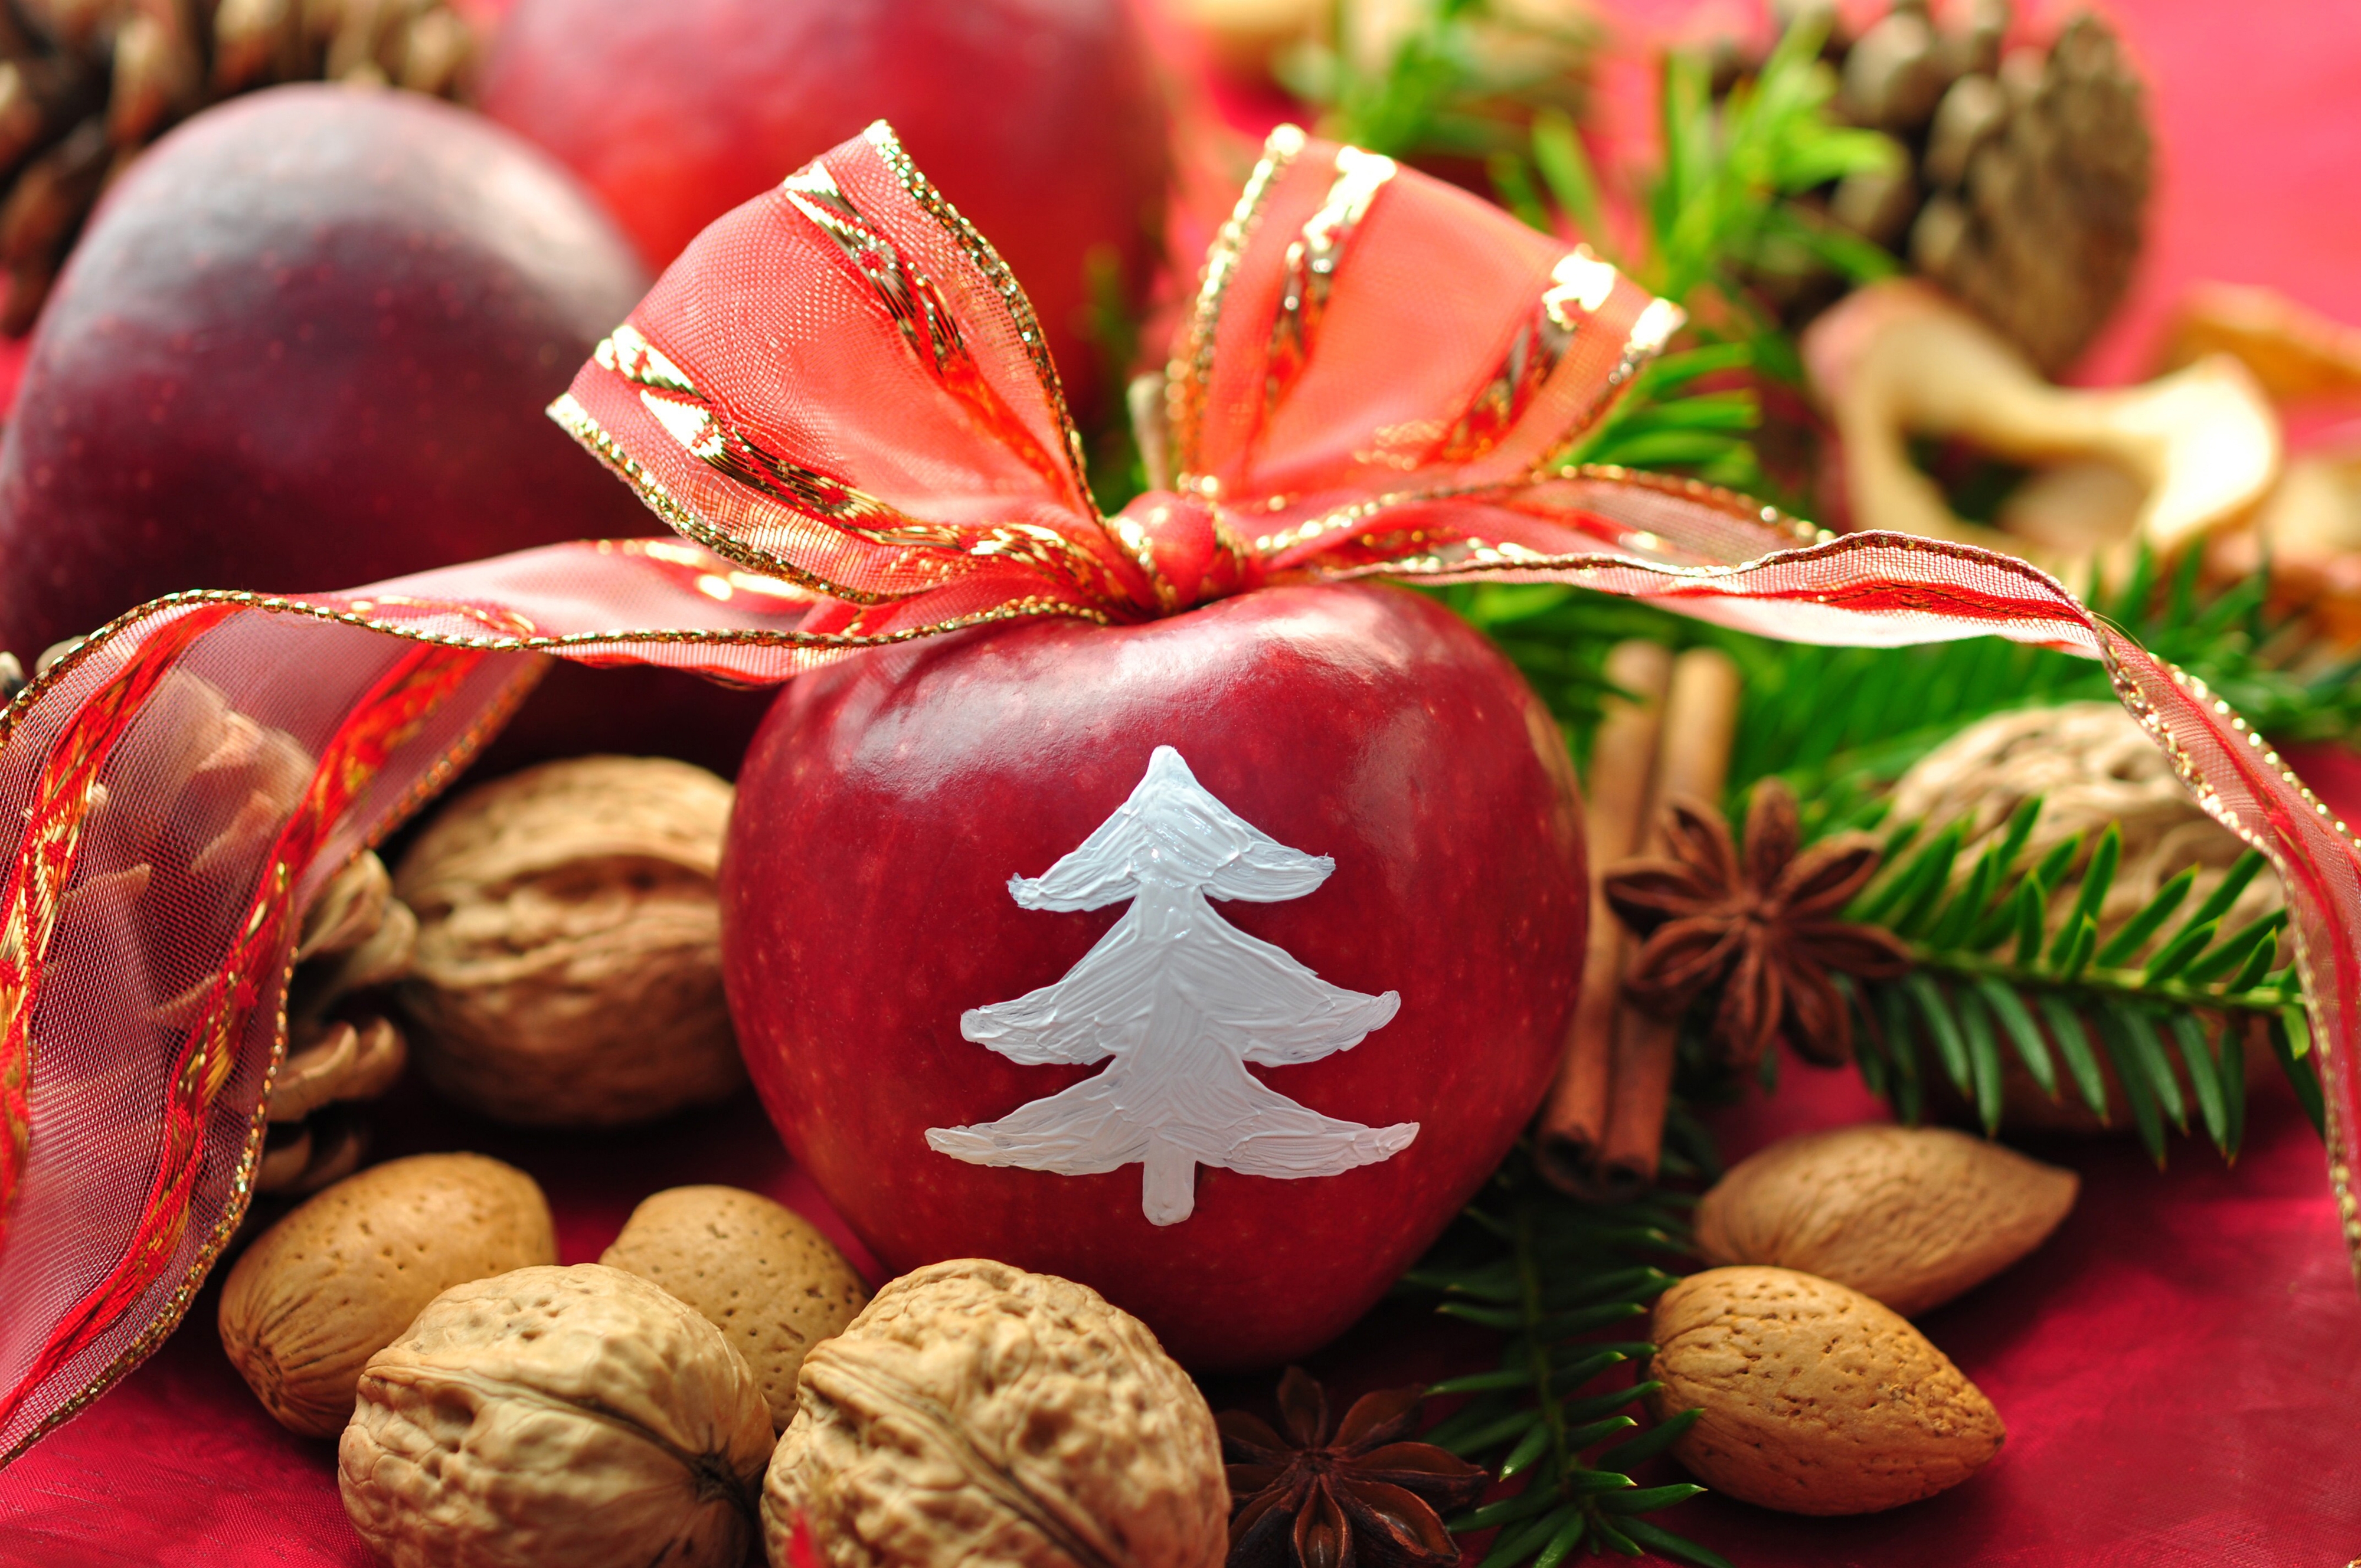 food, cones, new year, apples, cinnamon, nuts, holiday, table, needles, bow, tape, decor